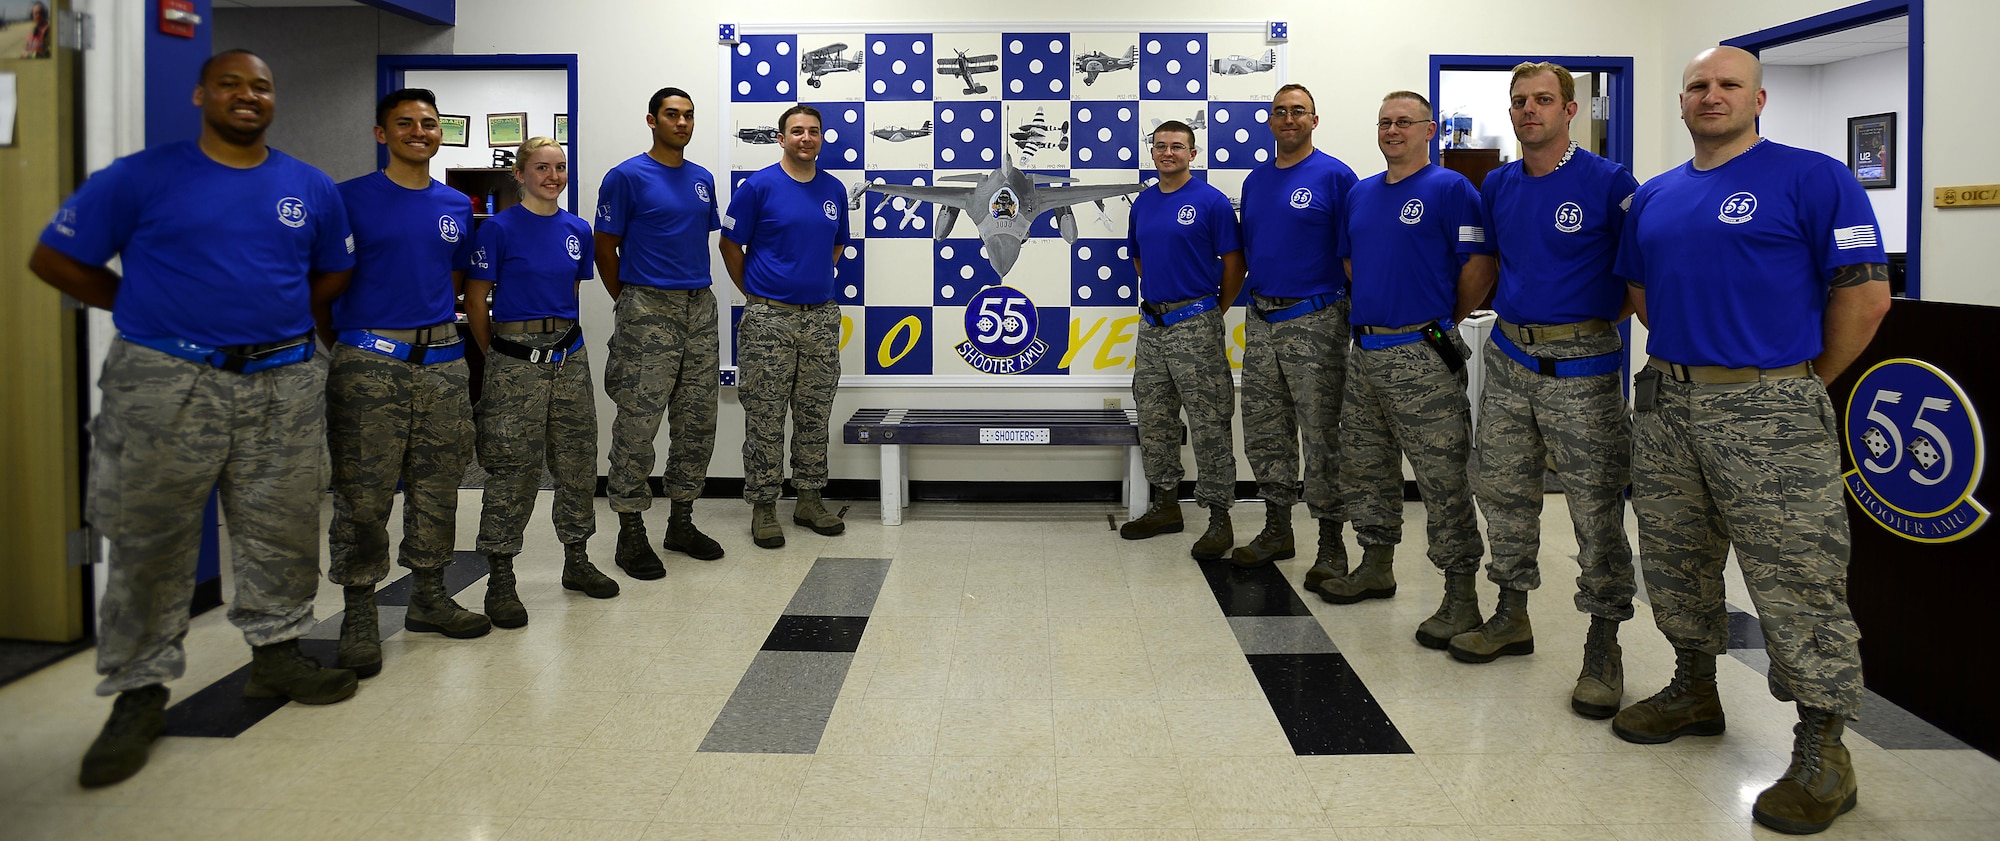 U.S. Airmen assigned to the 20th Aircraft Maintenance Squadron, 55th Aircraft Maintenance Unit (AMU,) pose next to a 100th anniversary mural in the 55th AMU building at Shaw Air Force Base, S.C., April 28, 2017. The mural commemorates a century of accomplishments since the 55th Fighter Squadron’s creation in 1917. (U.S. Air Force photo by Senior Airman Kelsey Tucker)